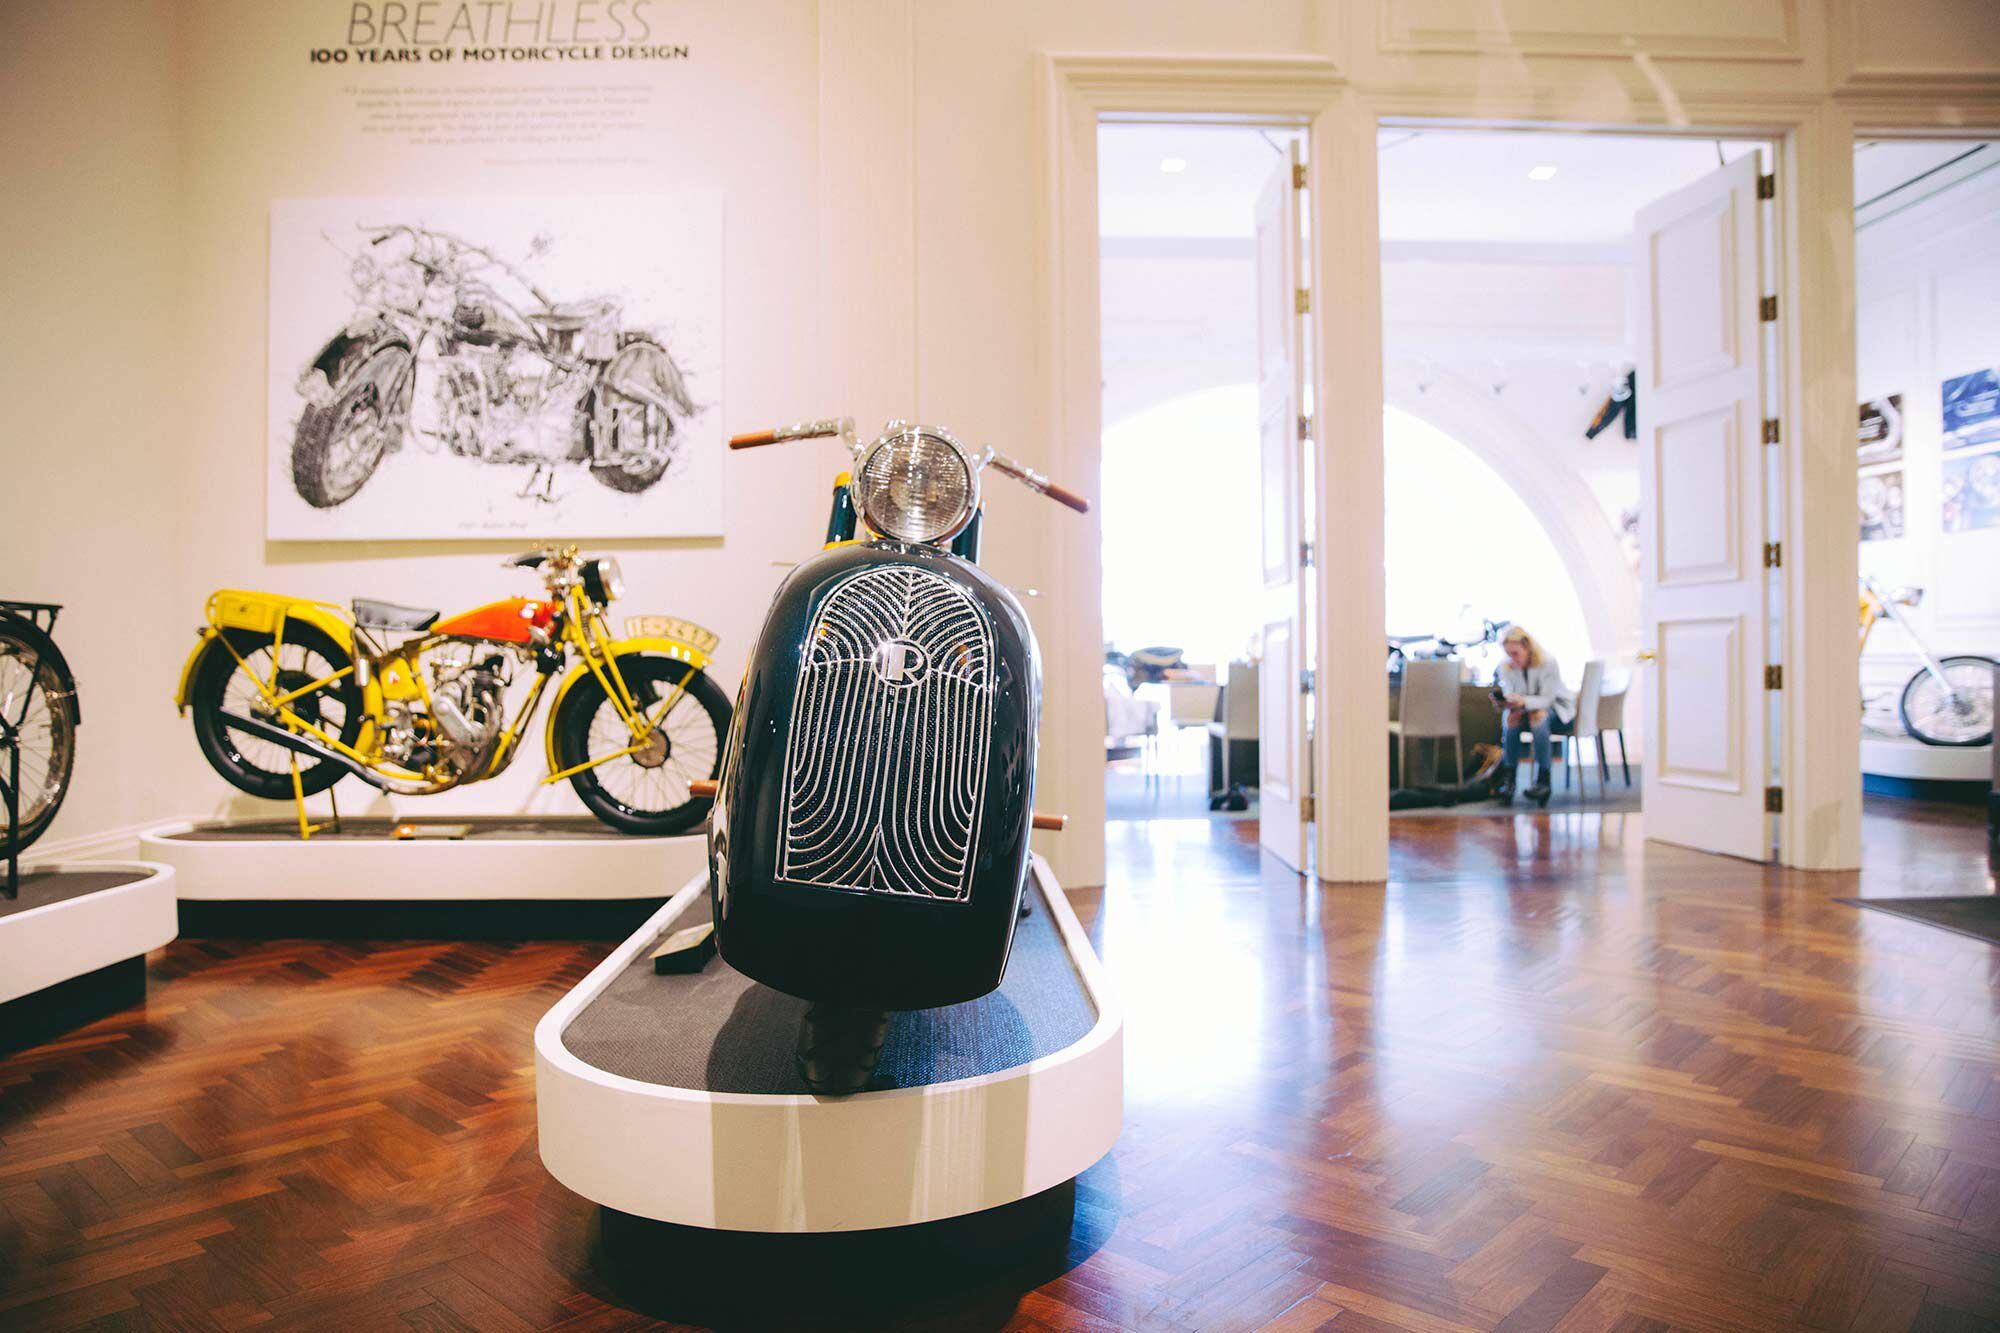 The museum’s History Hall holds 100 years of motorcycling history, be it production machines, prototypes, or racebikes.